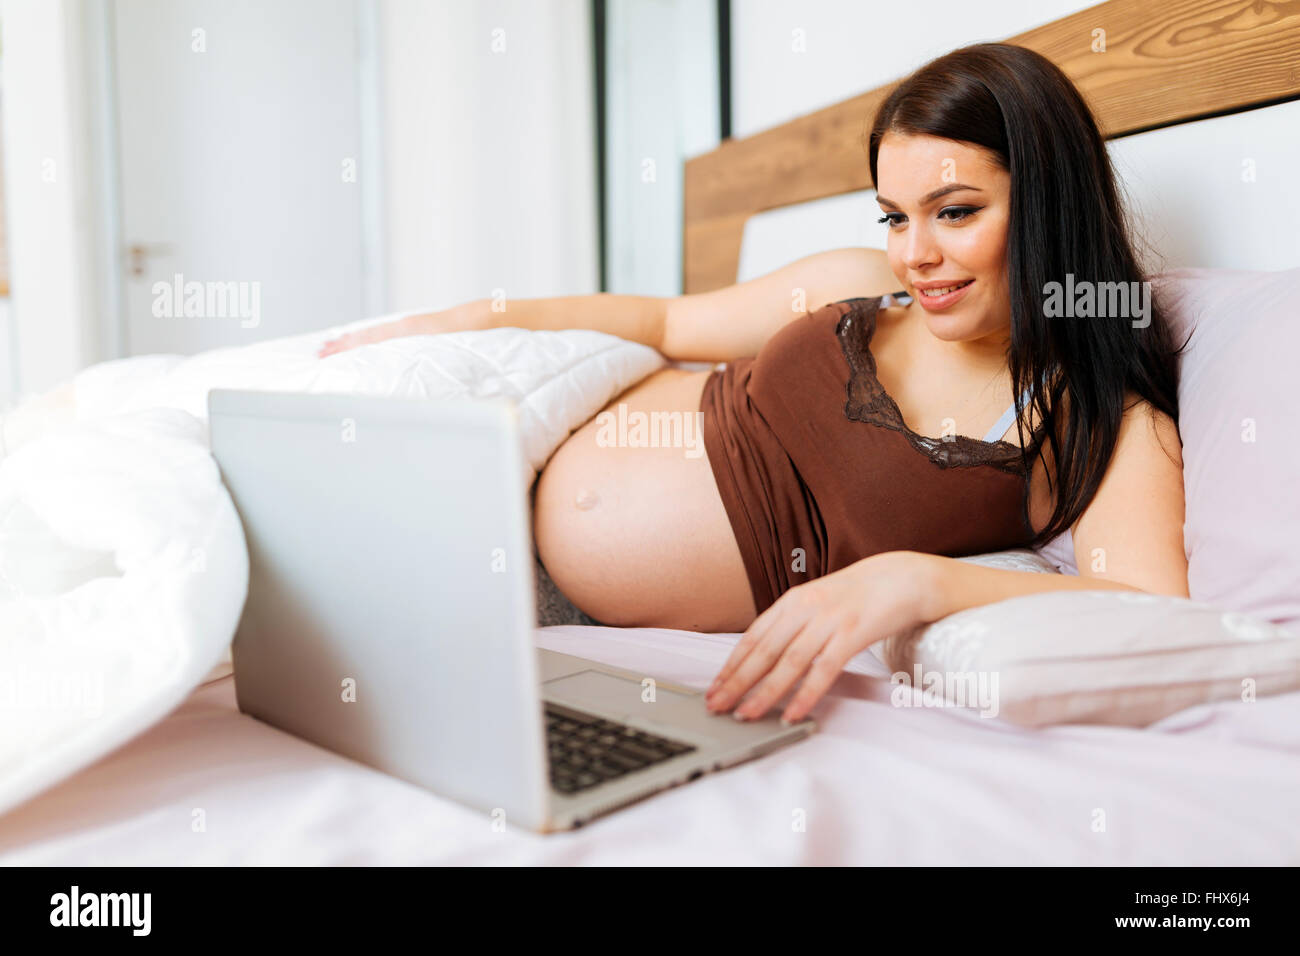 Beautiful pregnant woman using laptop in bed while resting Stock Photo